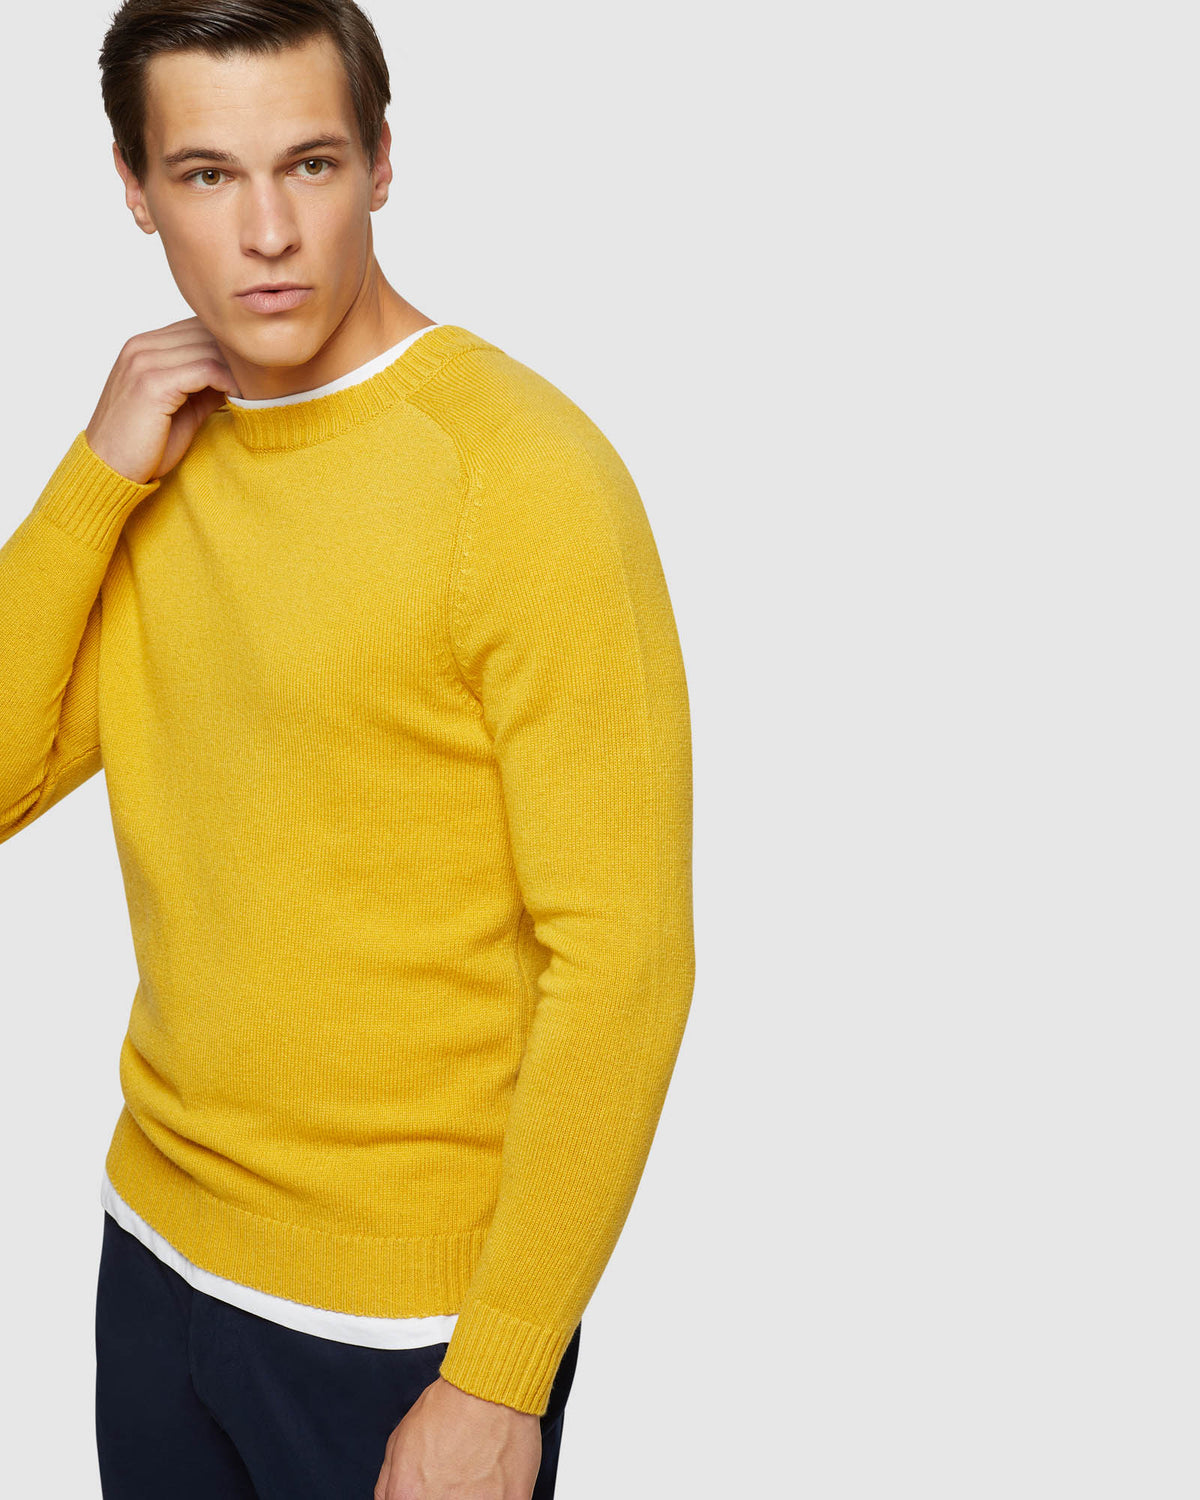 RITCHIE CREW NECK LAMBSWOOL KNIT MENS KNITWEAR